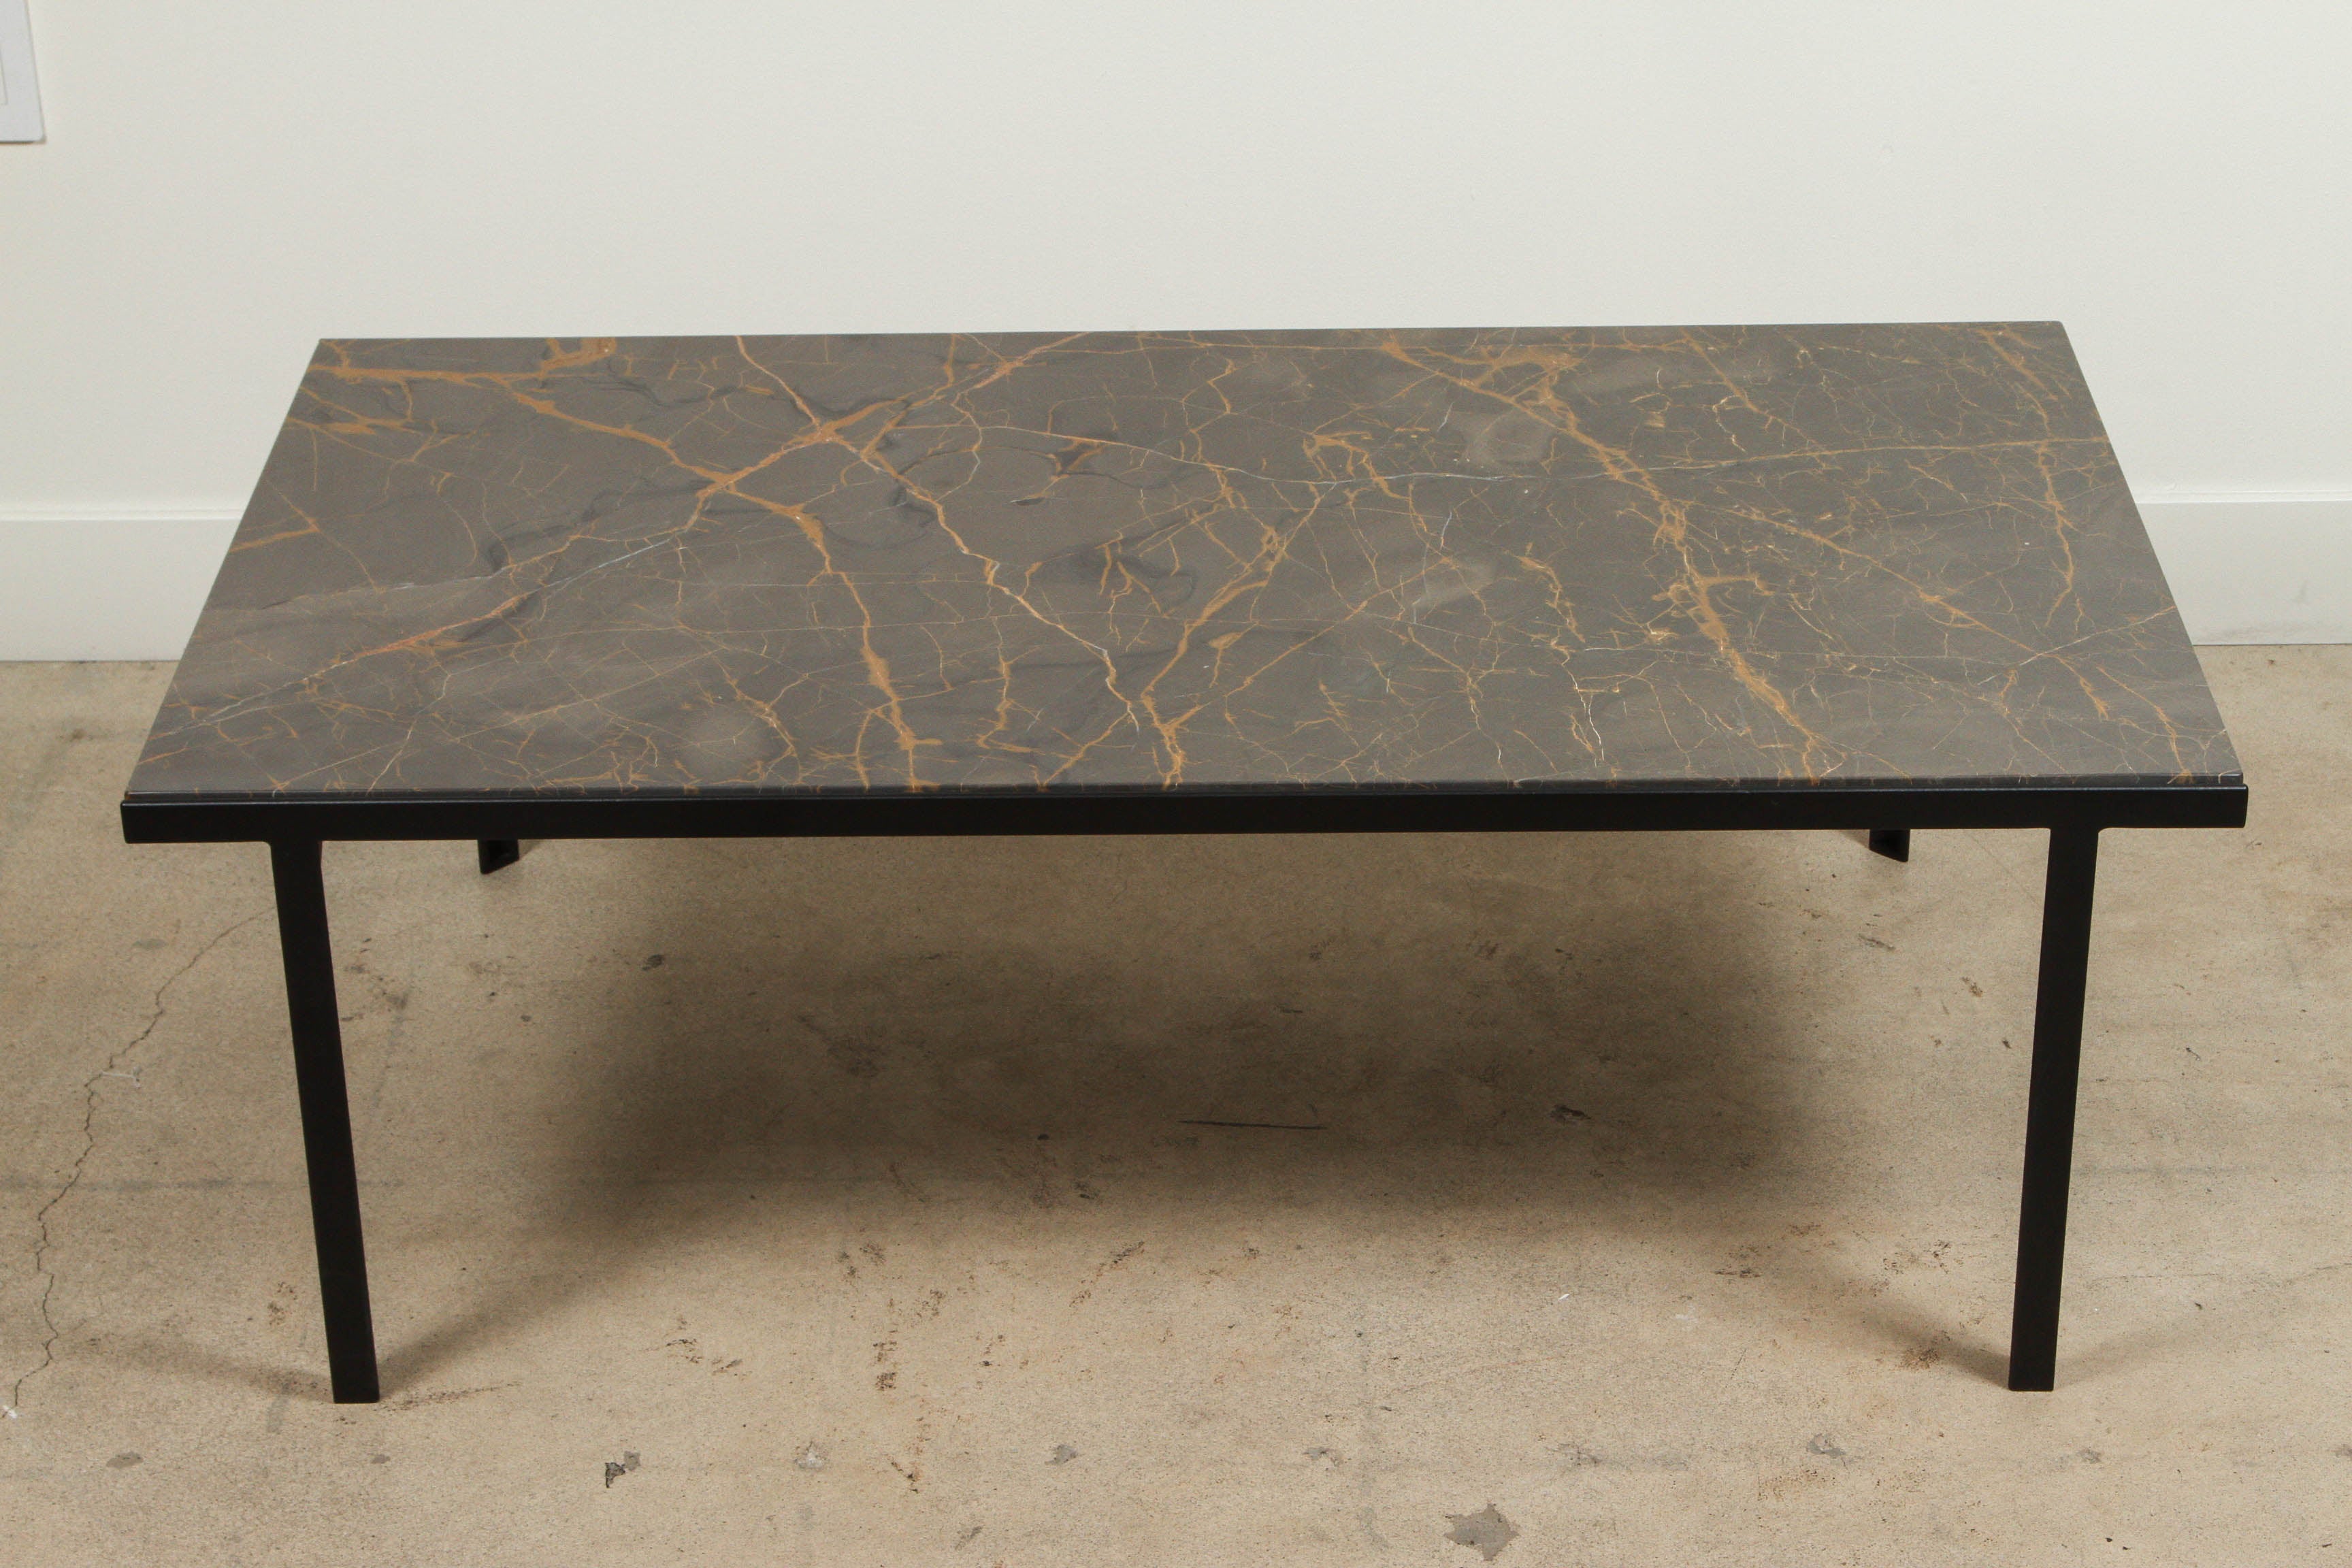 Montrose Table with Bronzetto Marble Top by Lawson-Fenning